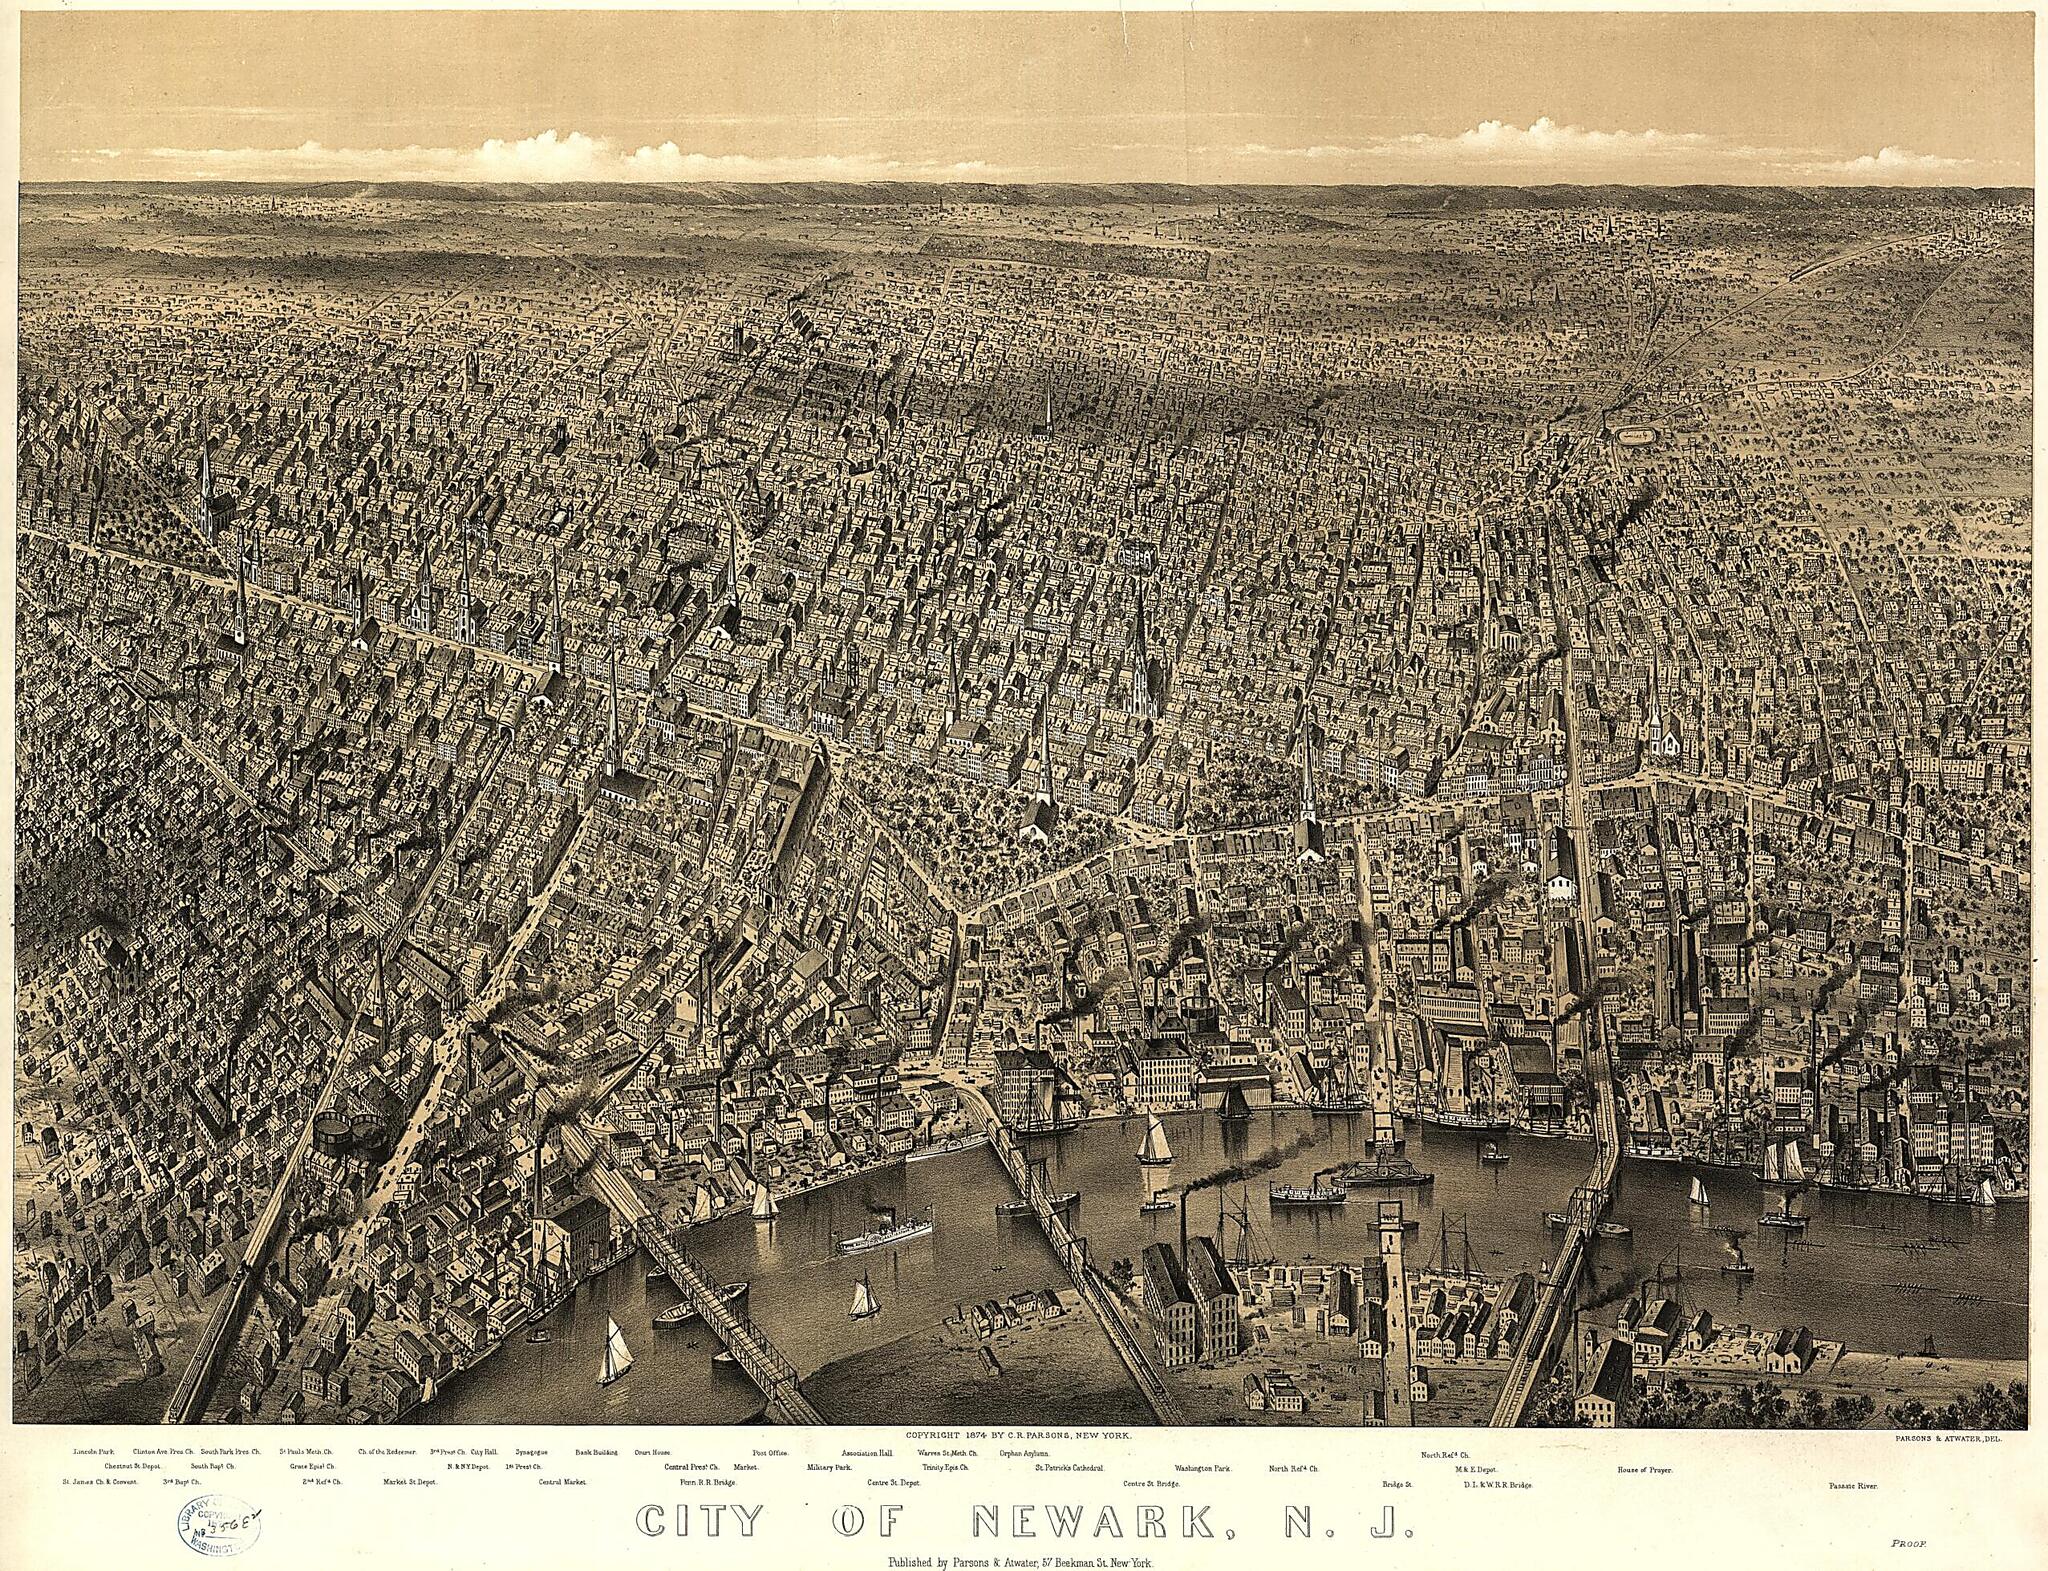 This old map of City of Newark, New Jersey / Parsons &amp; Atwater, Del from 1874 was created by  Parsons &amp; Atwater in 1874